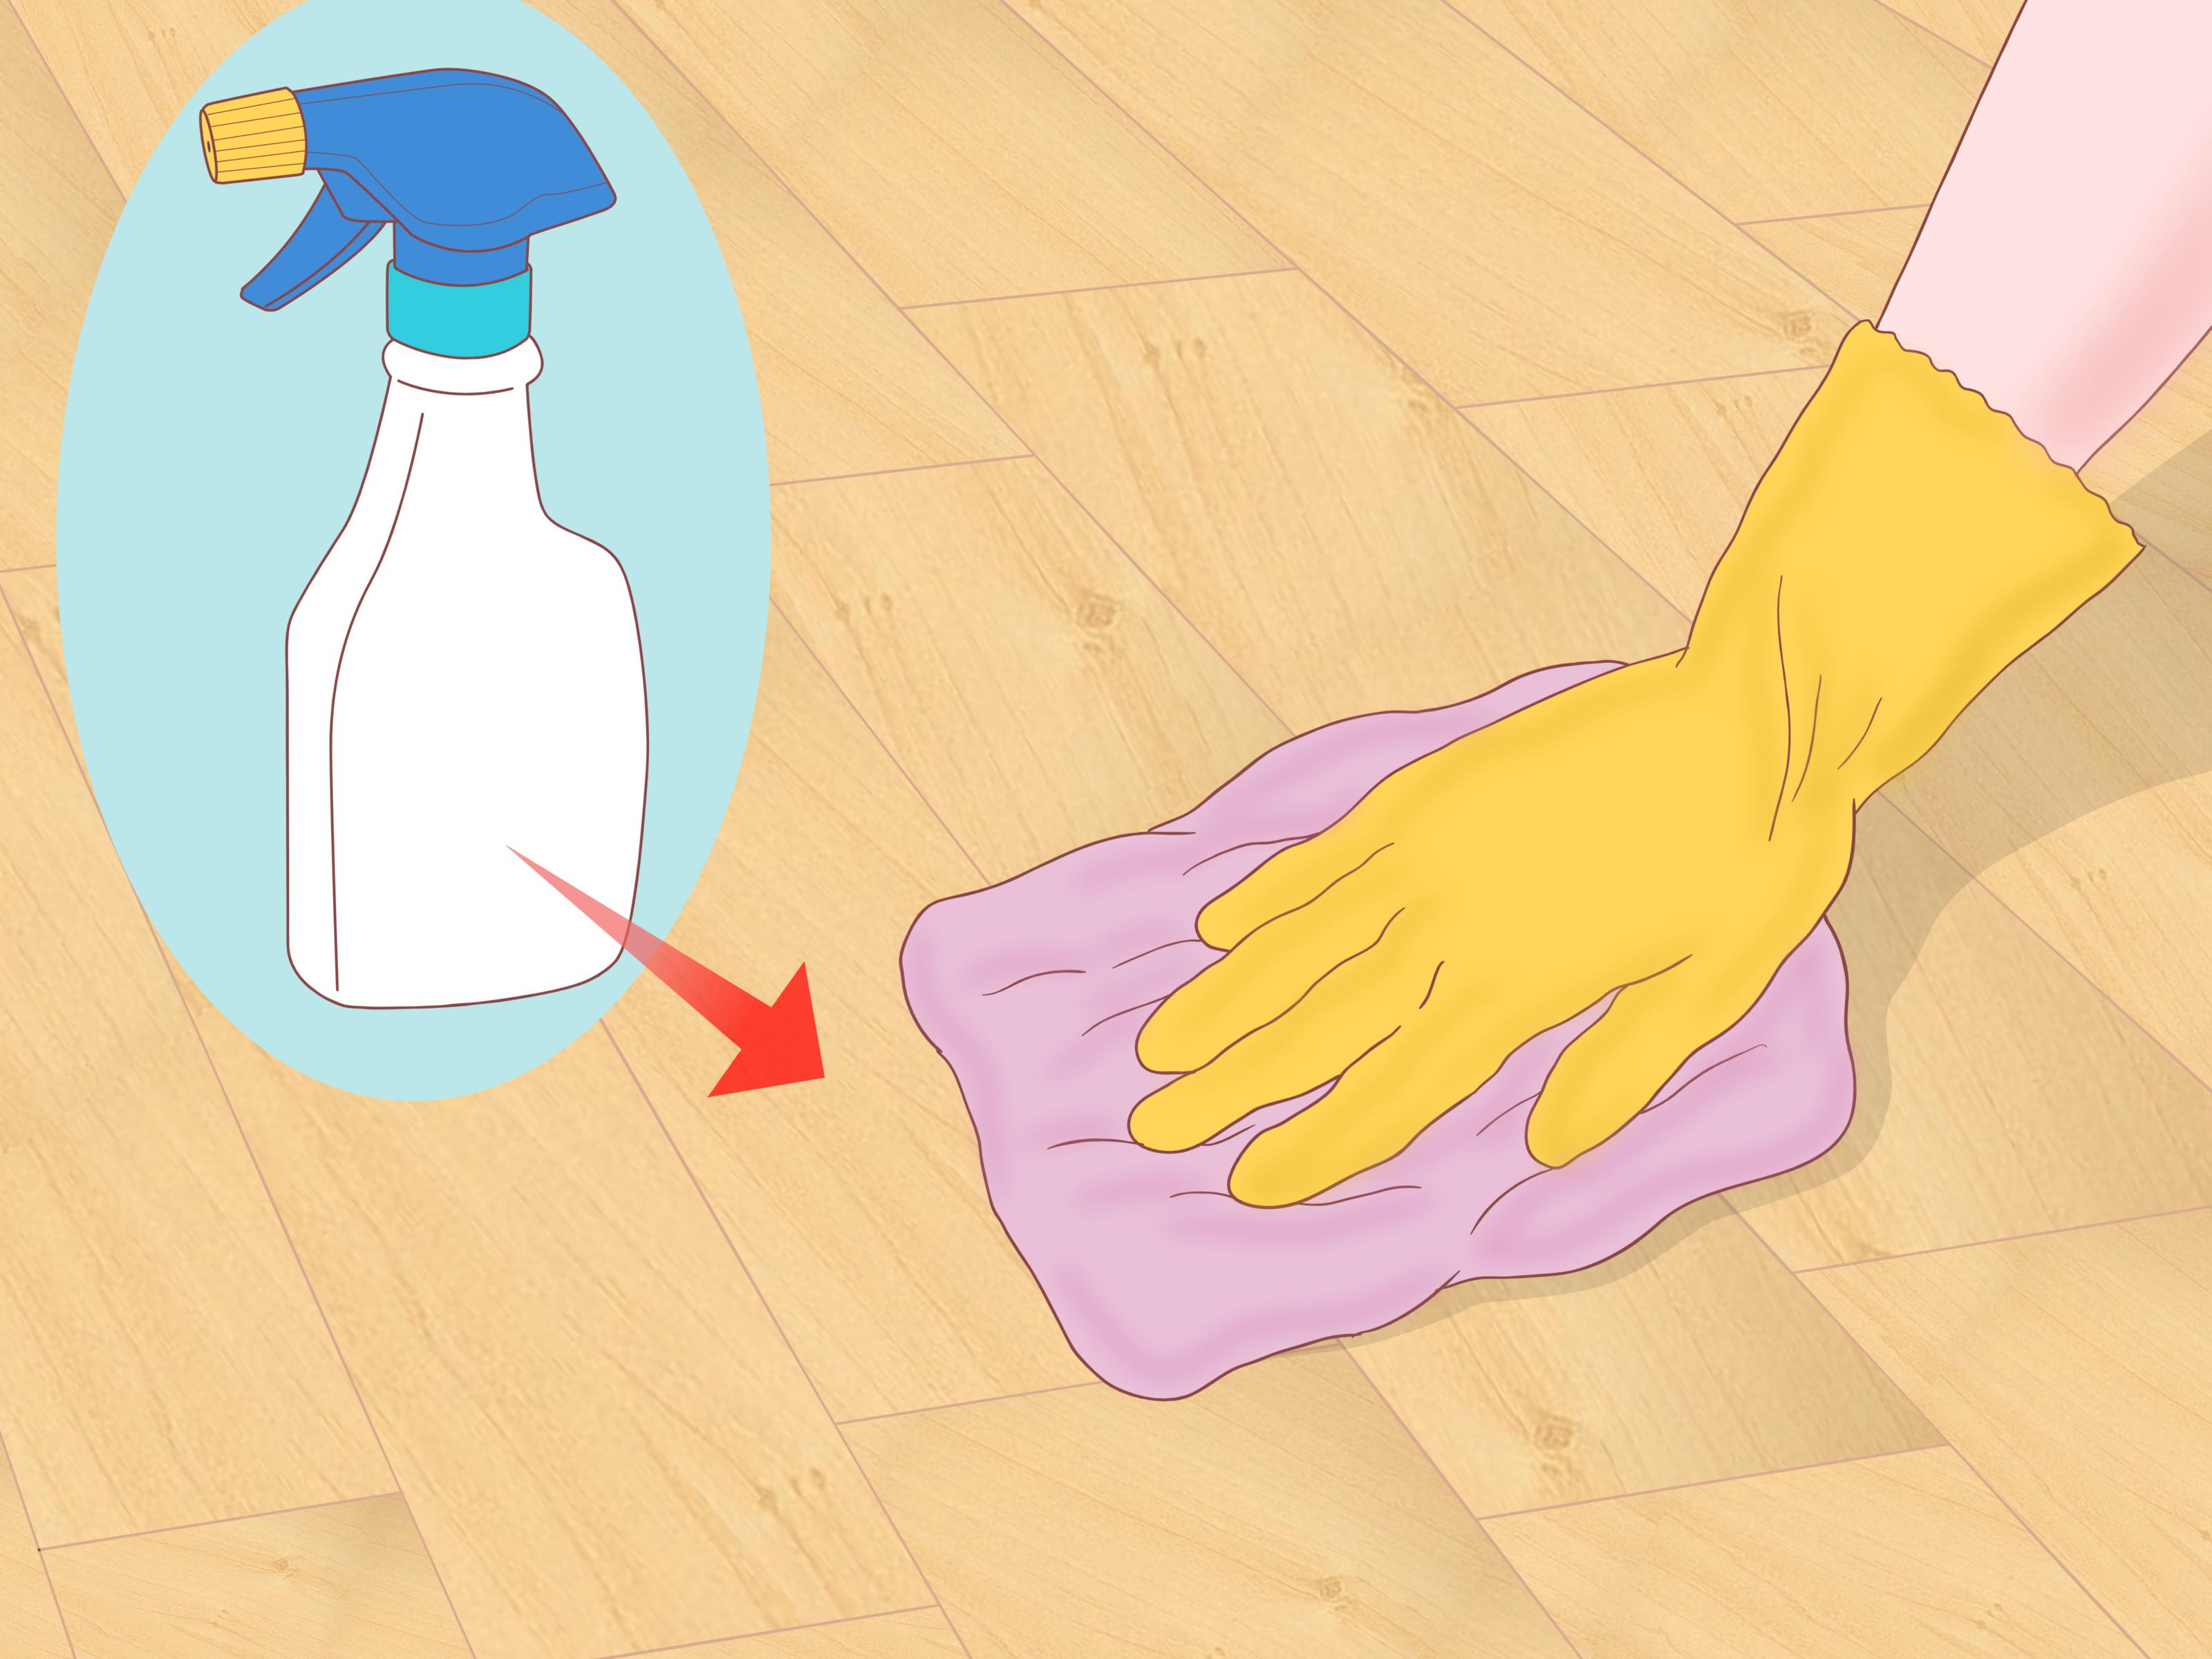 hardwood floor refinishing joliet il of 3 ways to clean parquet floors wikihow throughout clean parquet floors step 12